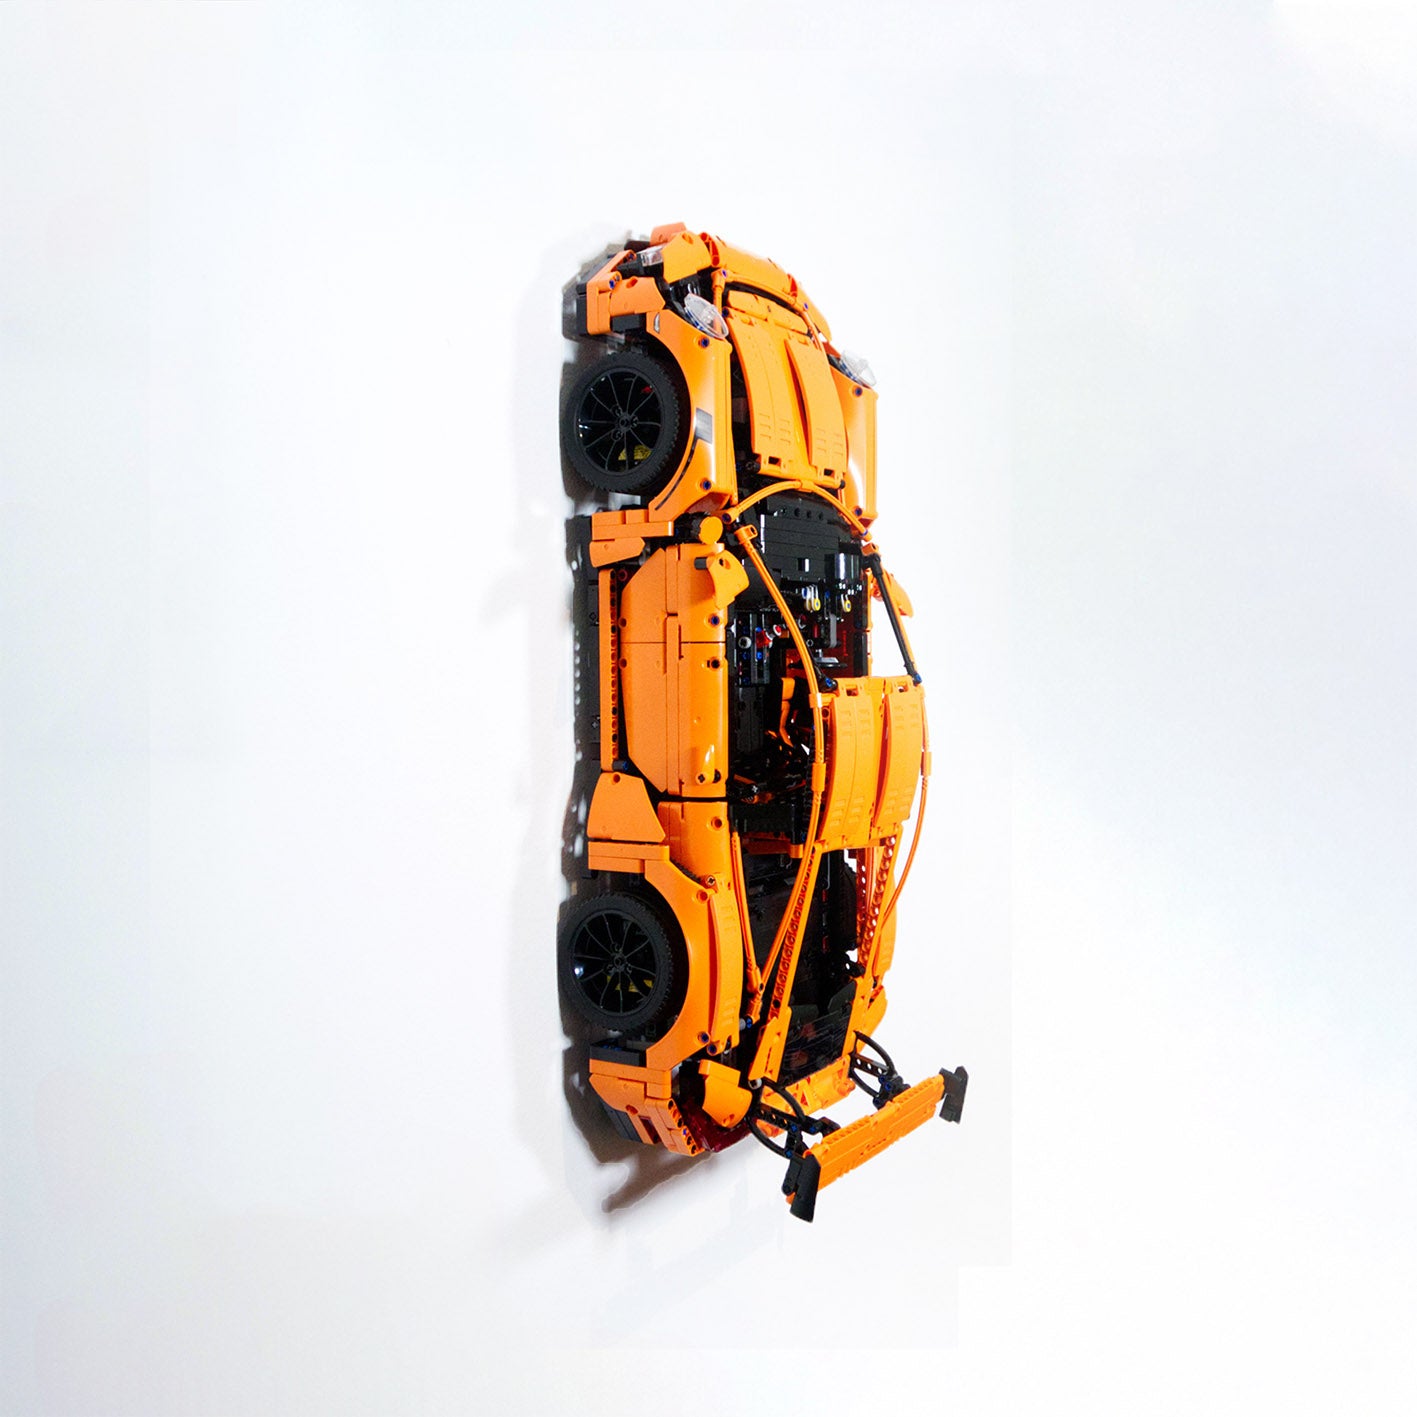 3D Printed Wall Mount 2 in 1 for LEGO Porsche 911 GT3 RS 42056